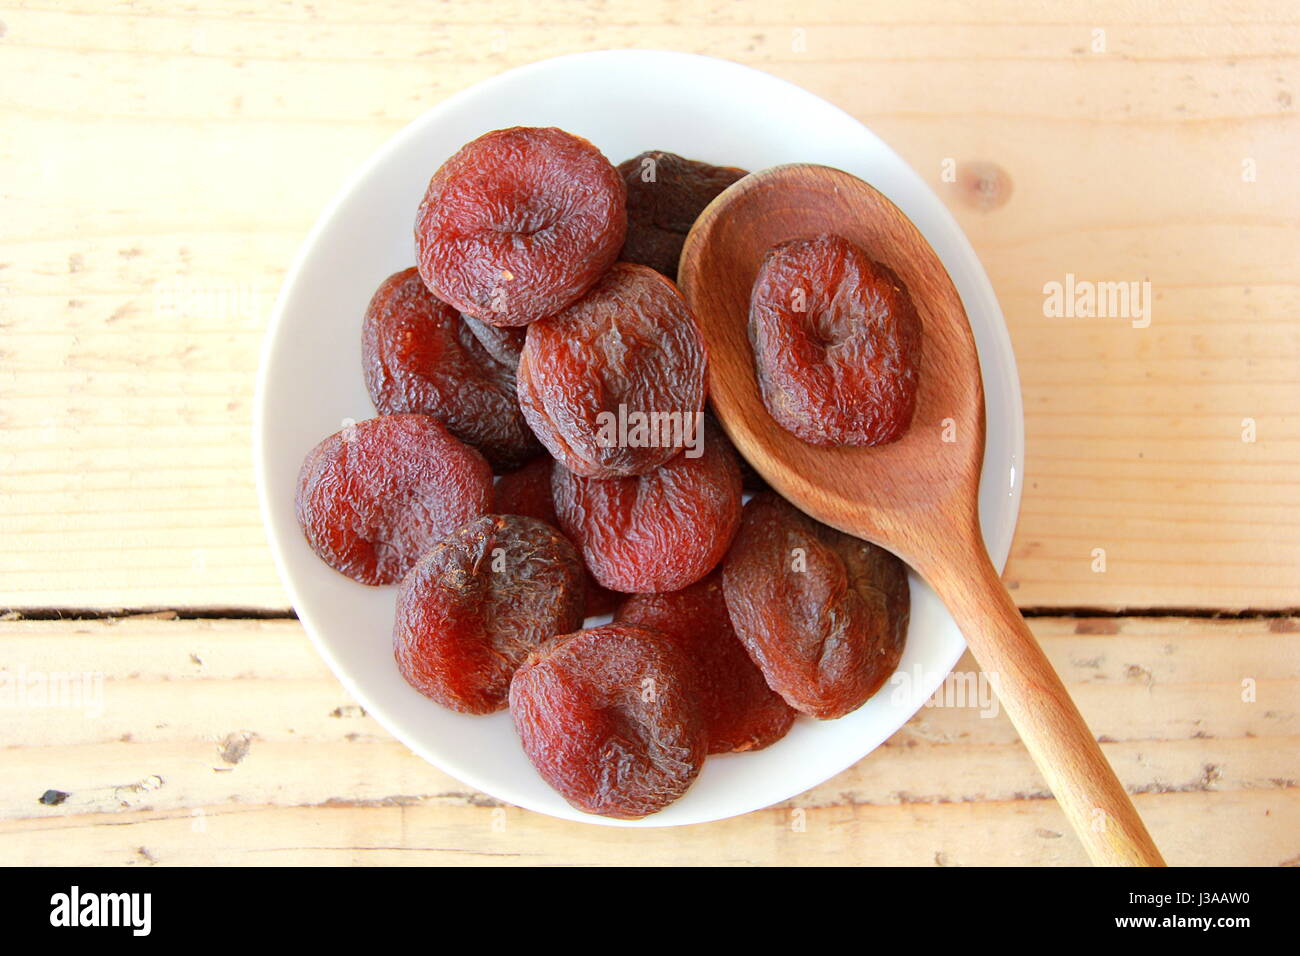 Dried fruits and nuts Stock Photo